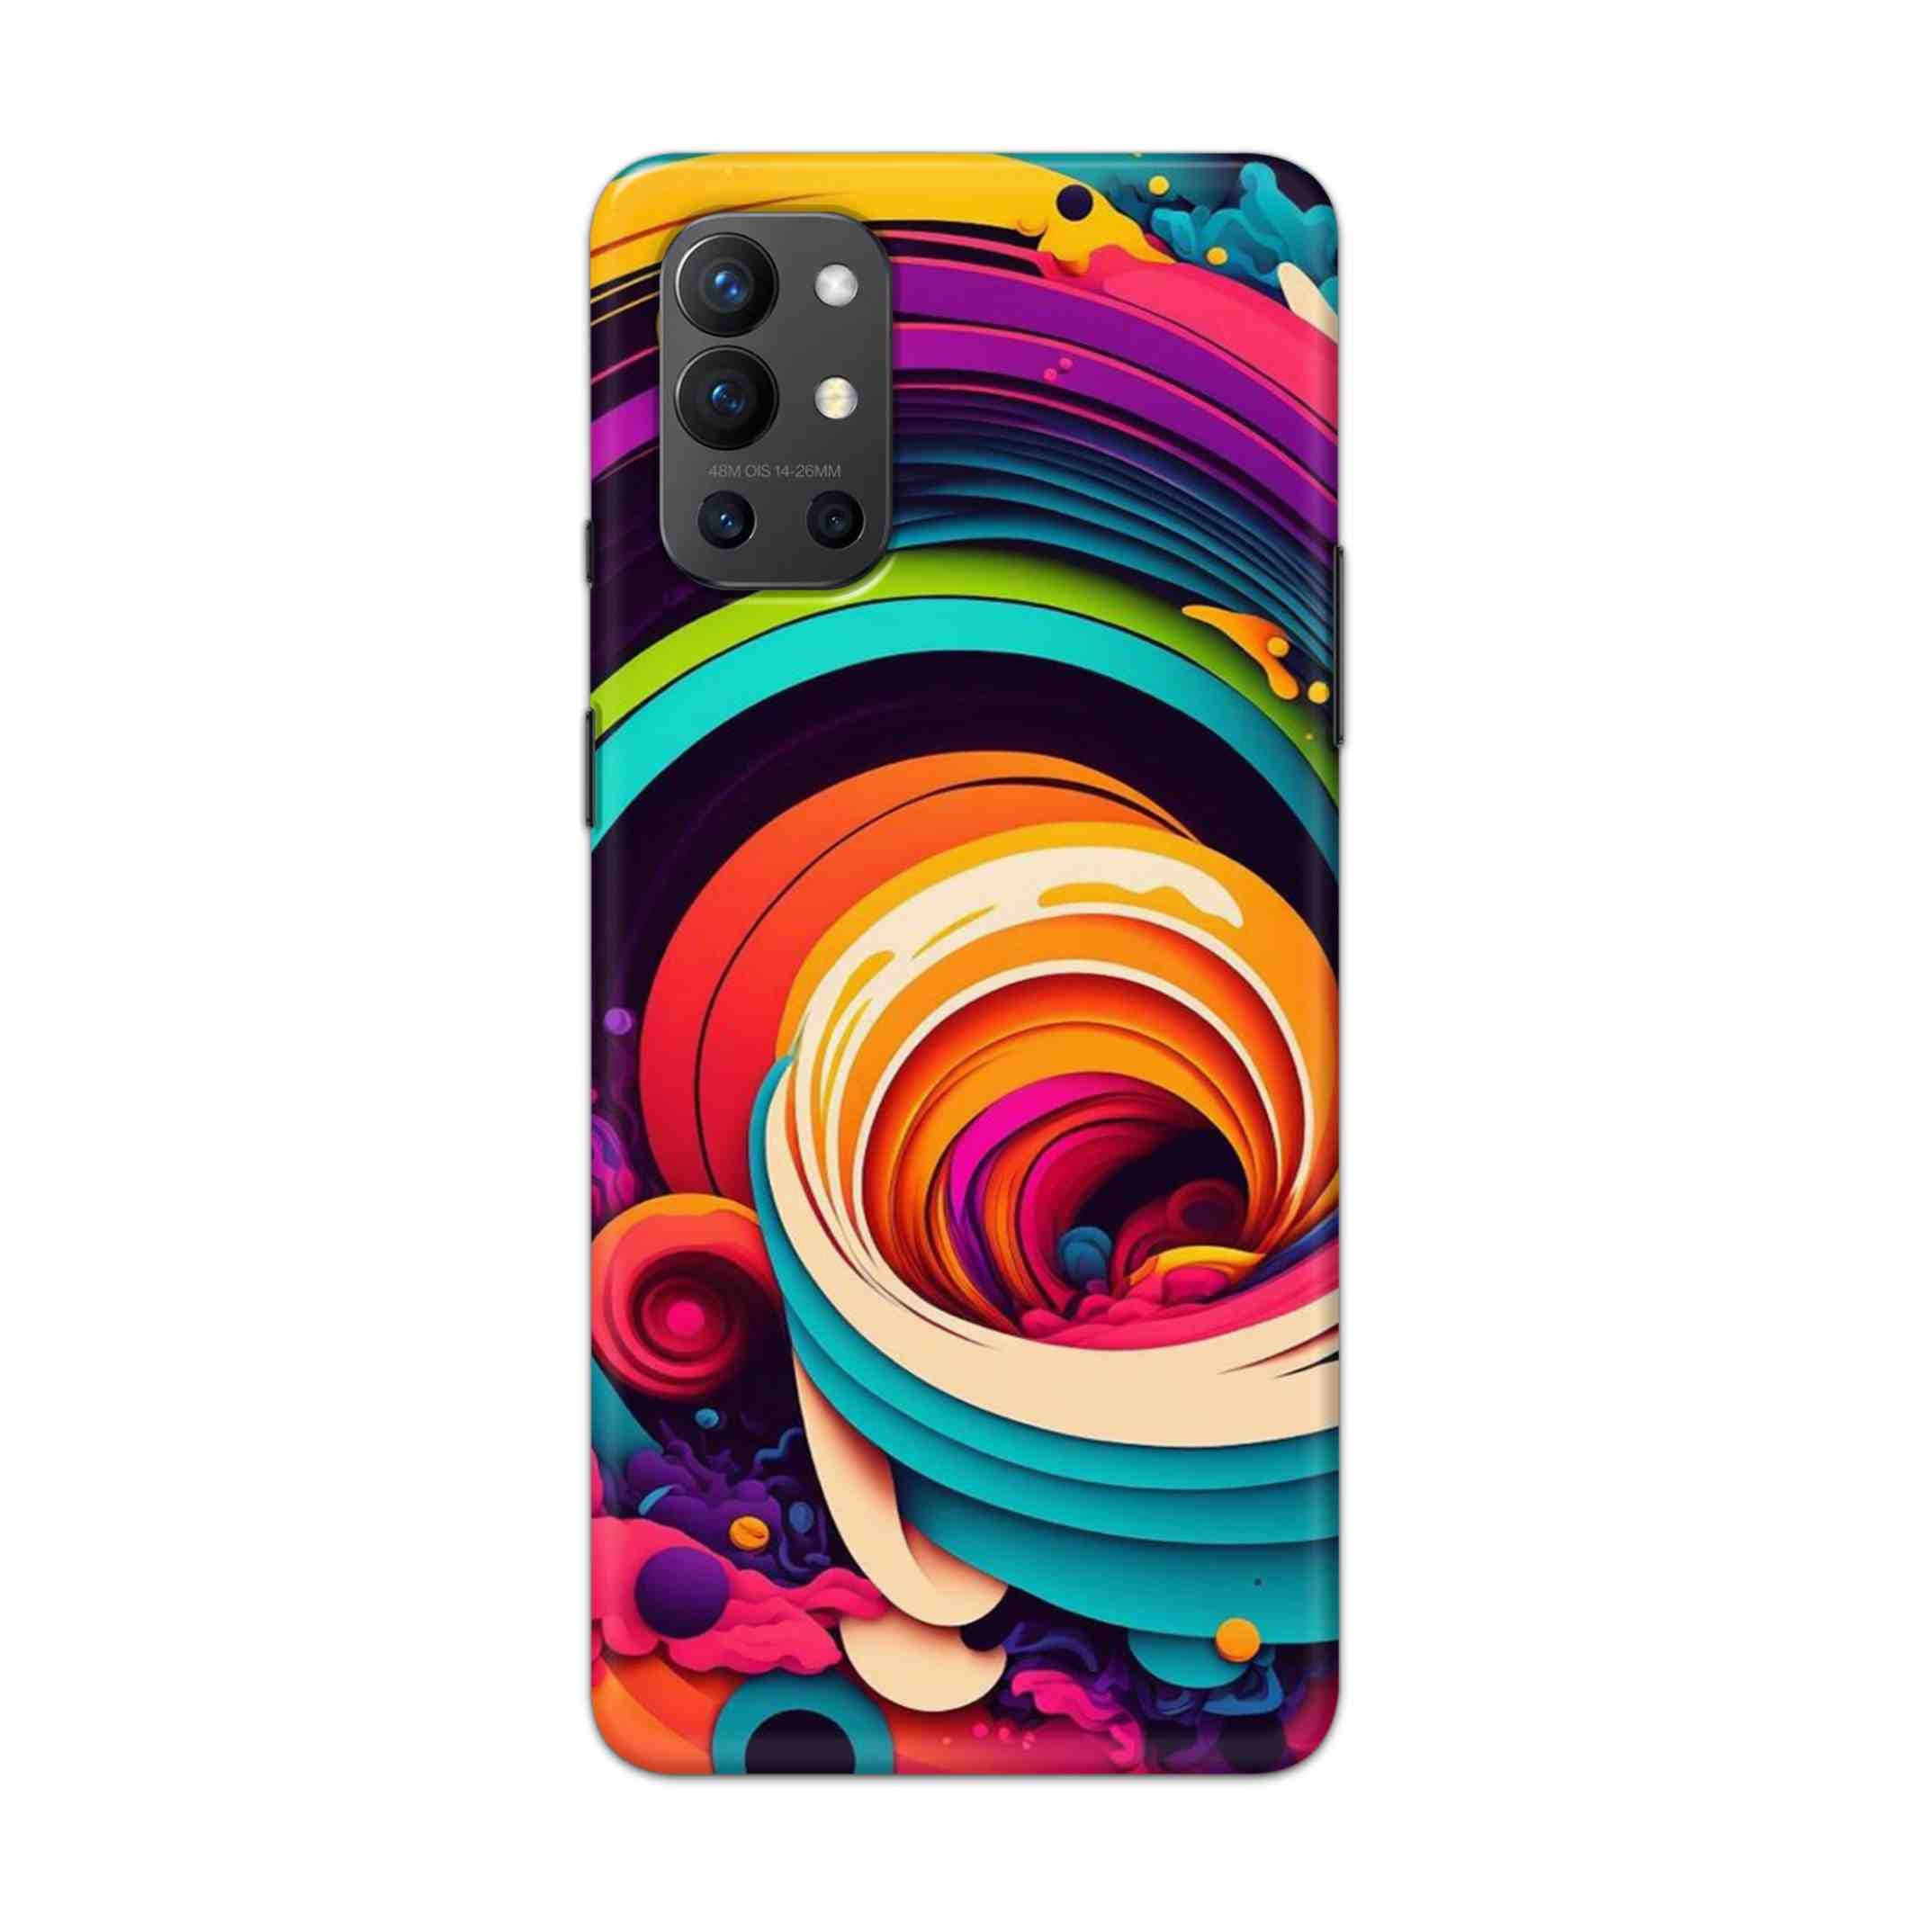 Buy Colour Circle Hard Back Mobile Phone Case Cover For OnePlus 9R / 8T Online